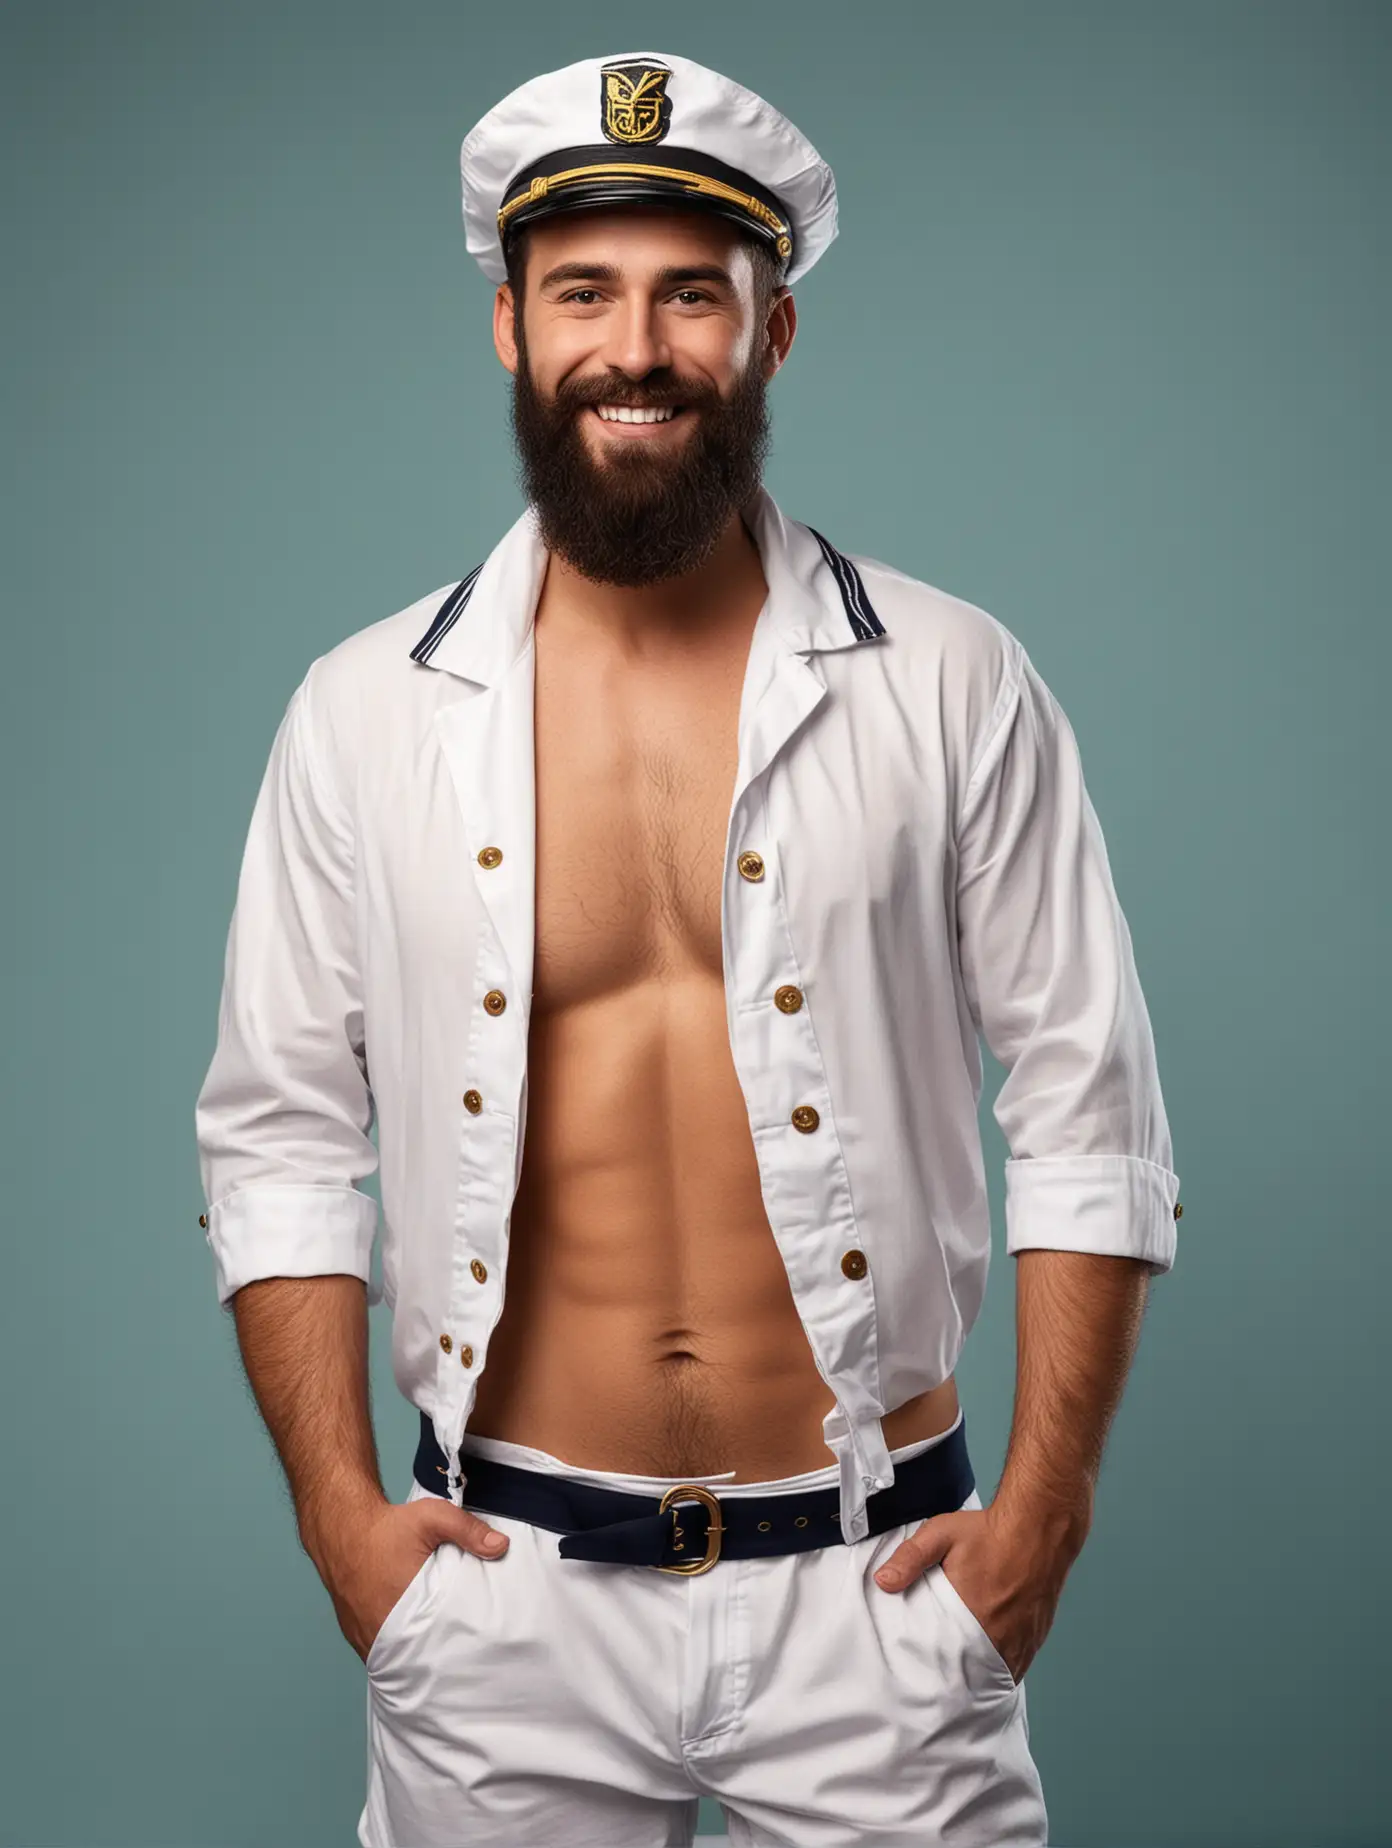 A full body shot of a smiling sexy male sailor with full beard and a sailor cap against a solid color background

